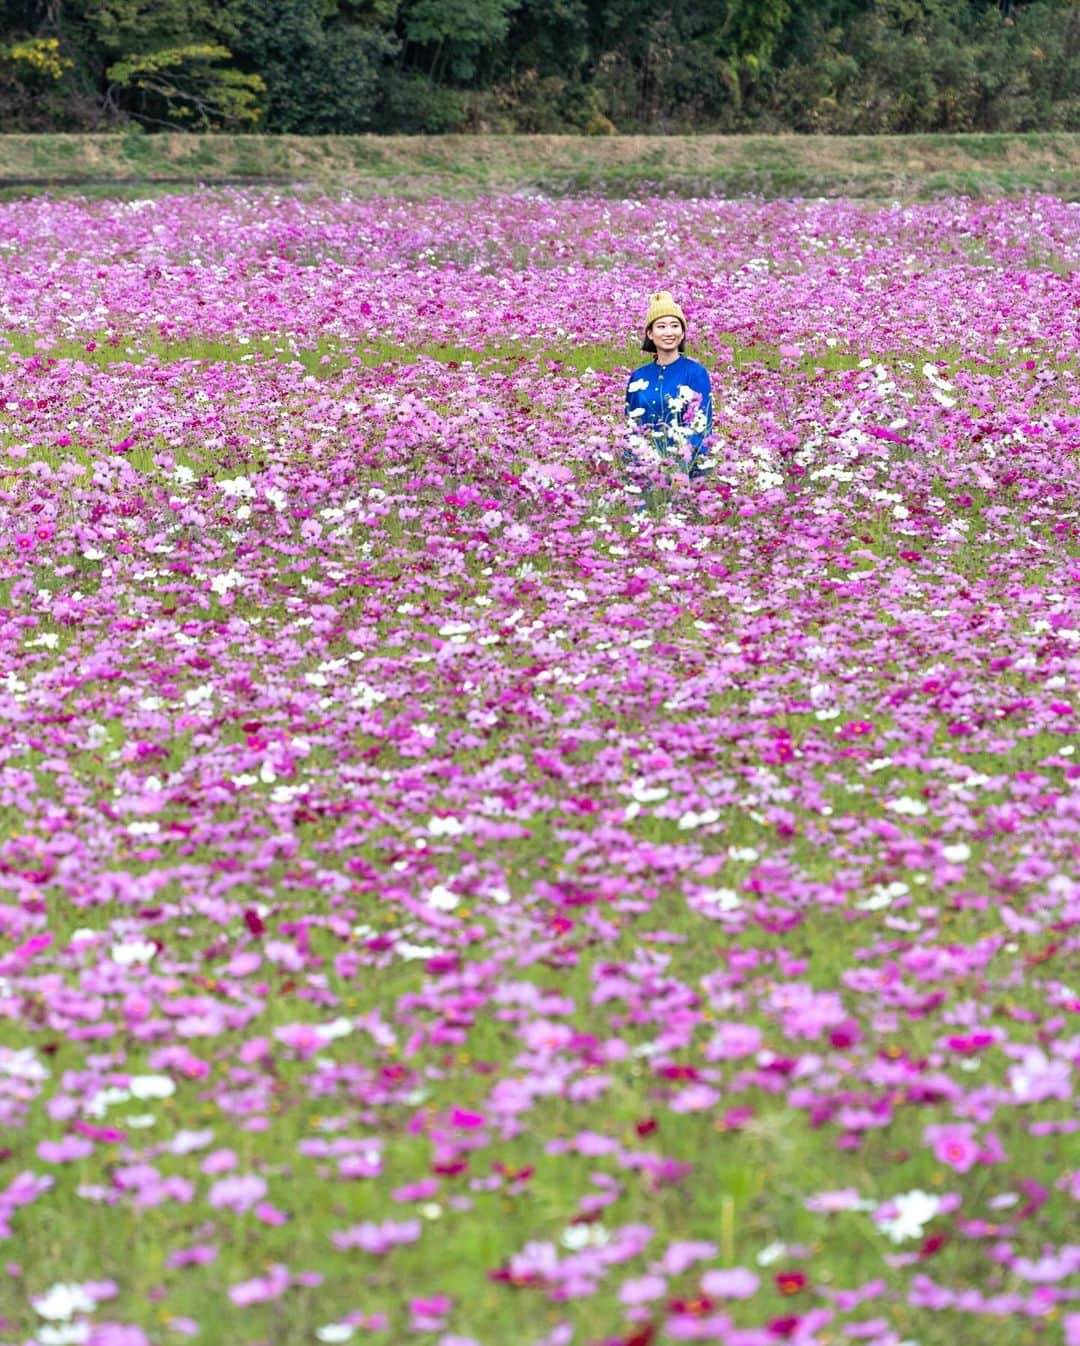 詩歩さんのインスタグラム写真 - (詩歩Instagram)「一面に広がる400万本のコスモス畑💐 A field of 4 million cosmos trees spreading all over the area!  愛媛の宇和島市で開催中の #みま町コスモスまつり 。田んぼに植えられたピンク色の絨毯が道を挟んでずーっと奥まで続いてて、その規模にびっくり😳😳写真で写ってるのは本当にごく一部なの！  全国いろいろなコスモス畑を見てきたけど、私がみた中で一番広いコスモス畑な気がする👏👏  （写真はうまく撮れなかったんだけど）コスモス畑の中には徳島から遊びに来ていたカカシもたくさんいて、観光客なのかカカシなのか、よく見ないと分からなかったのが面白かった〜笑  例年の見頃は10月下旬〜11月上旬頃で、今年は今週末くらいまでとのことです。  愛媛県の観光情報はこちら @iyokannet https://www.iyokannet.jp/  愛媛県さんのお仕事で取材してきました🍊これまでの絶景写真は #詩歩のえひめ旅 でまとめています / Posts of this area can be found in this tag. #shiho_ehime  The Mimama-cho Cosmos Festival is being held in Ehime, Japan. I was surprised at the scale of the pink carpet of cosmos planted in the rice paddies that stretched all the way across the road. I have seen many cosmos fields all over Japan, but I think this is the largest cosmos field I have ever seen! There were many scarecrows from Tokushima in the cosmos field, and it was interesting that you had to look carefully to figure out if they were tourists or scarecrows...! Usually the best time to see them is from late October to early November, and this year they will be around until the end of this week.  📷6th Nov 2023 📍愛媛県 みま町コスモスまつり / Mima Town Cosmos Festival, Ehime Japan    ©︎Shiho/詩歩」11月11日 18時50分 - shiho_zekkei